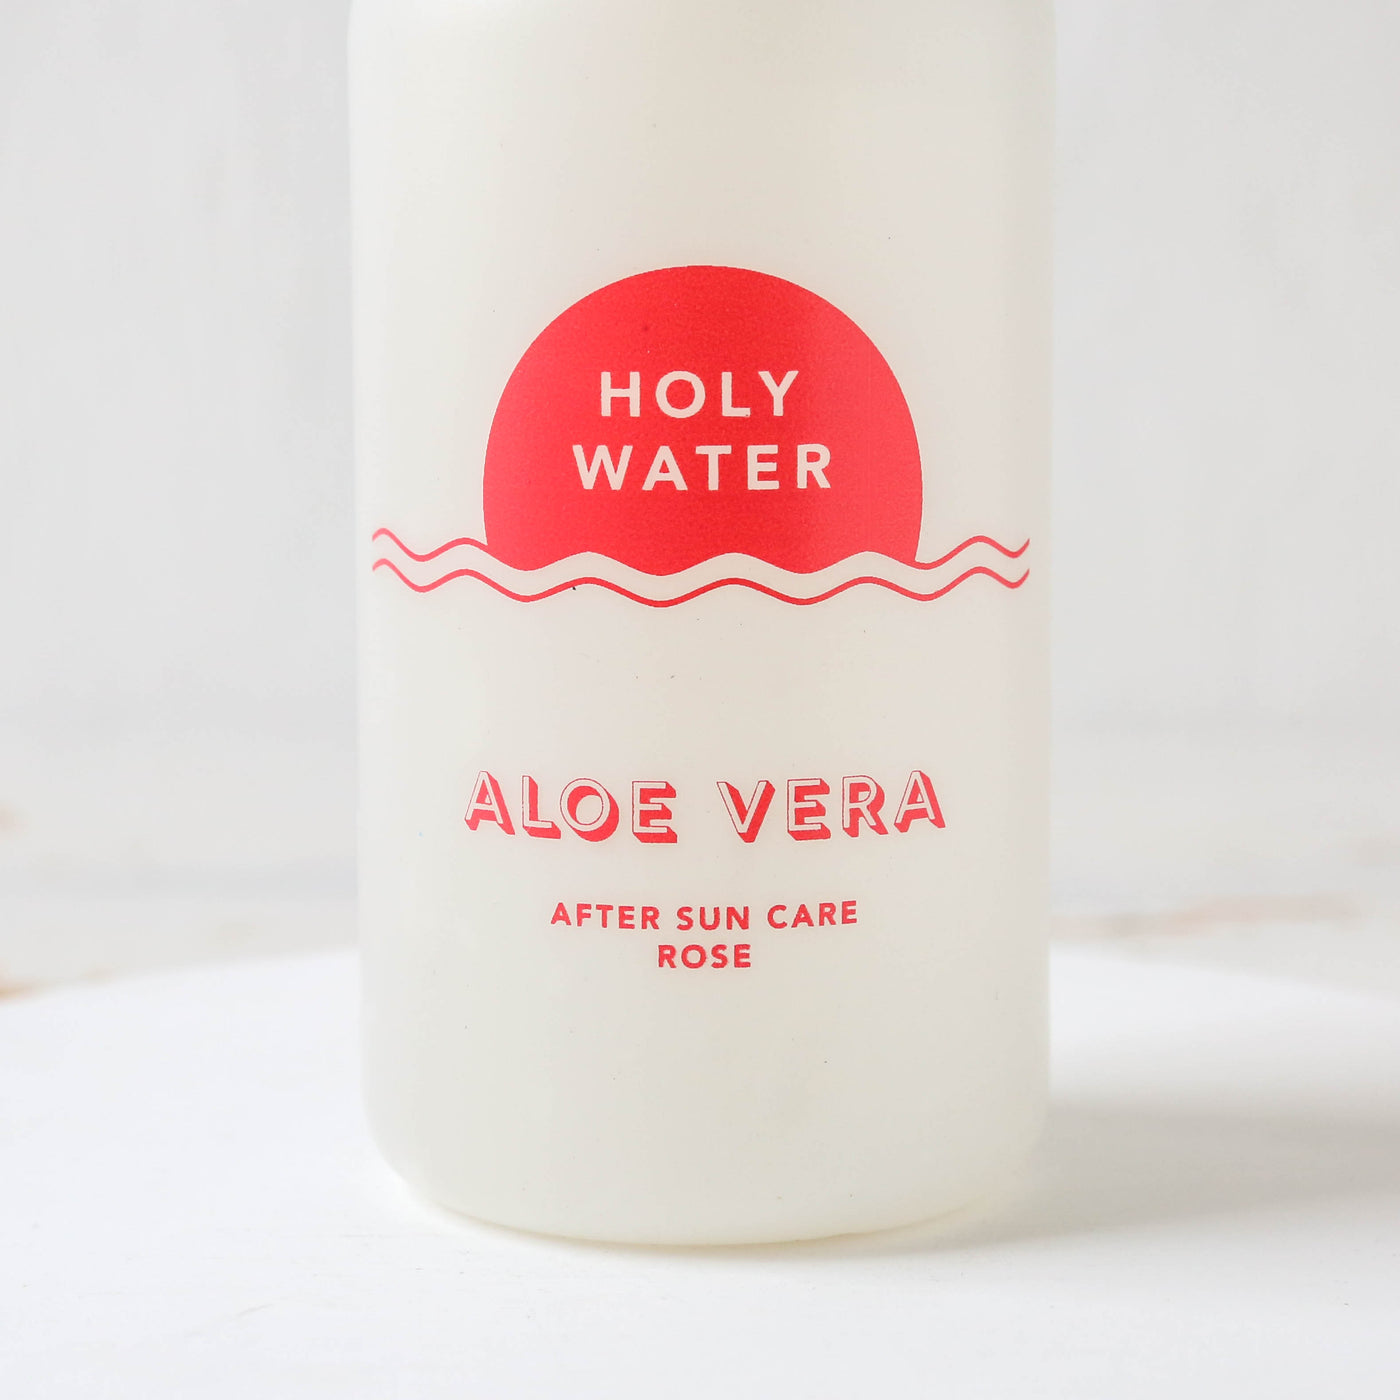 Aloe Vera After Sun by Holy Water